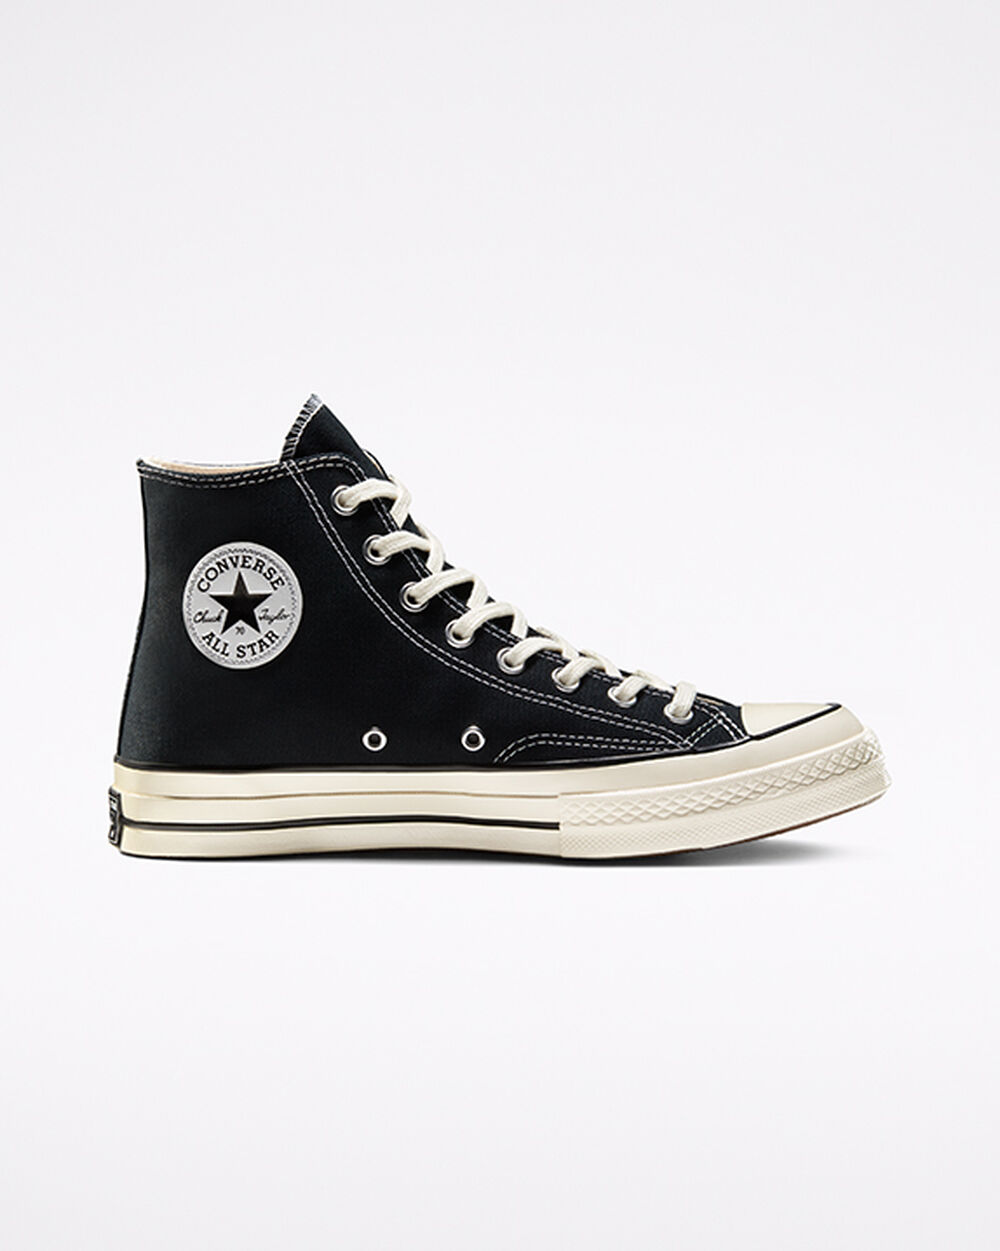 Converse Shoes UAE - Buy Cheap Converse Sneakers Online